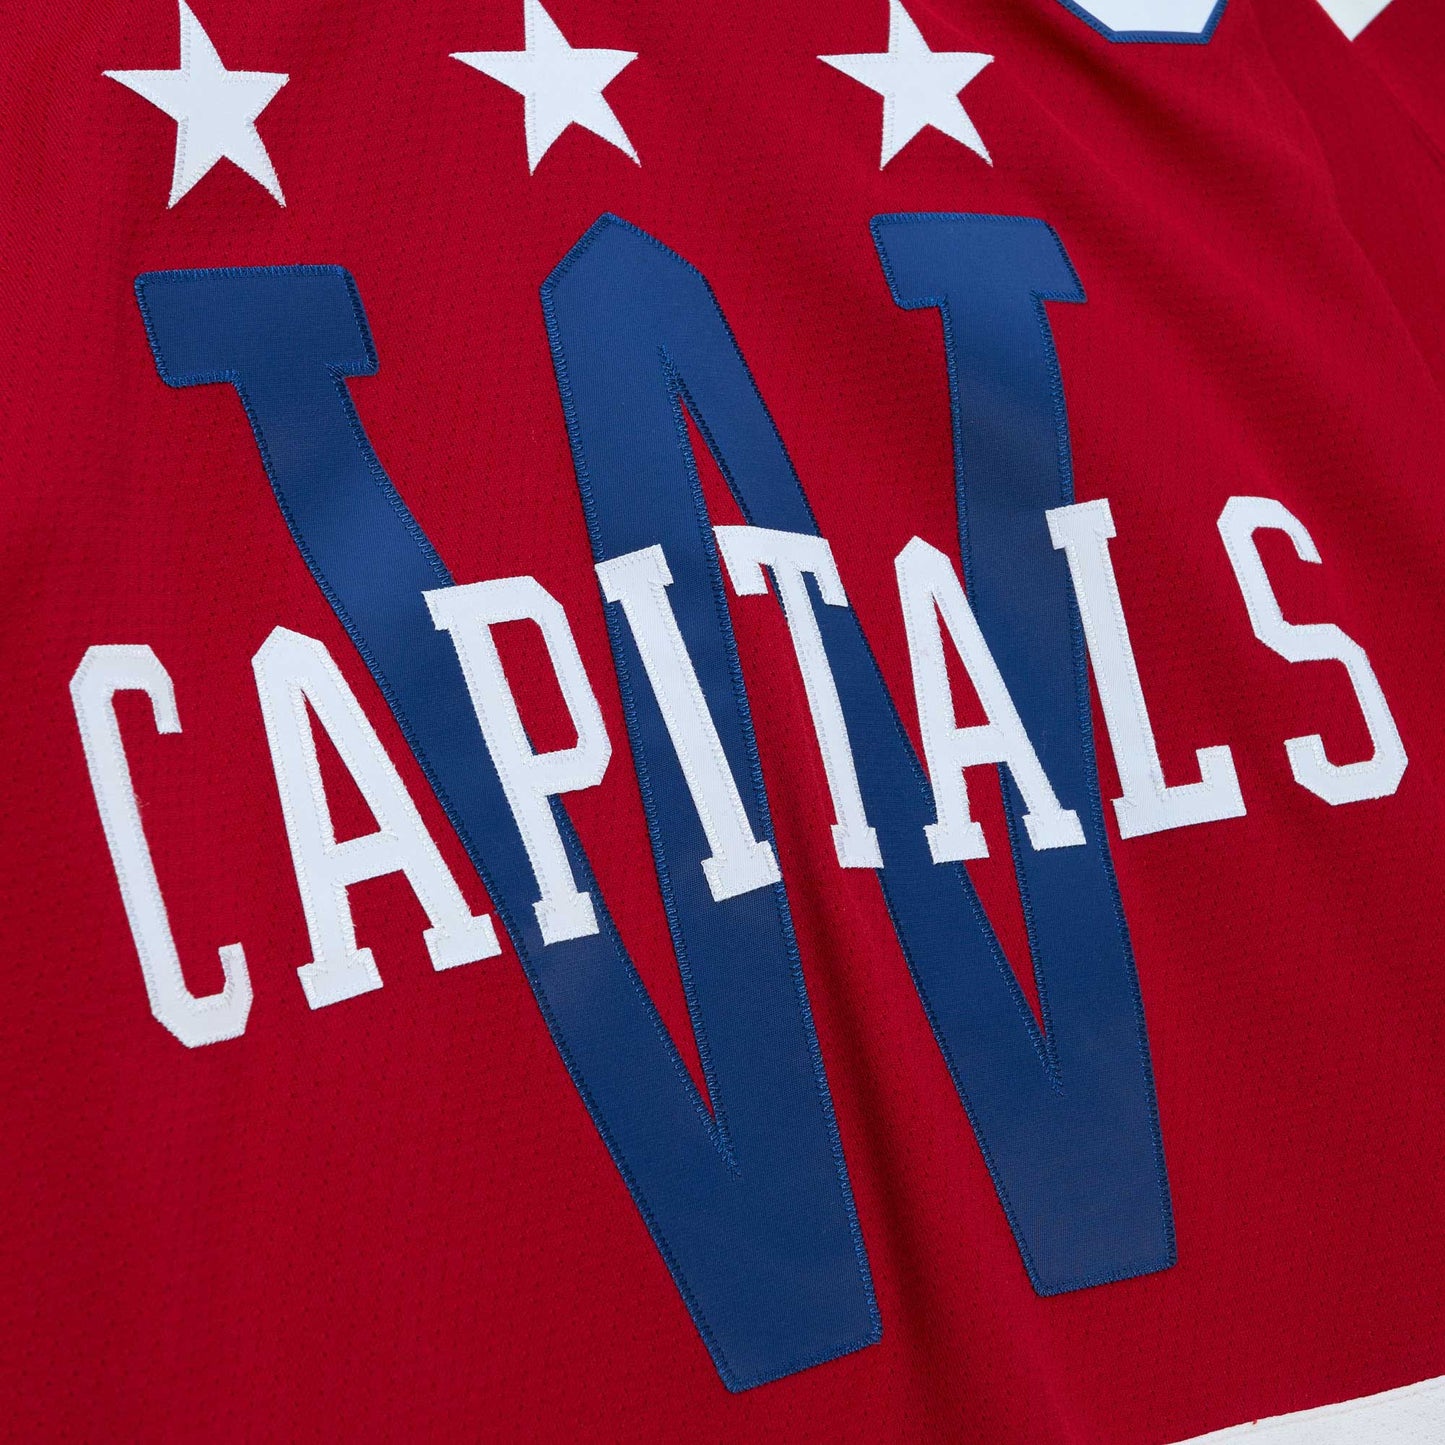 Alexander Ovechkin Washington Capitals Mitchell & Ness 2015 Captain Patch Blue Line Player Jersey - Red